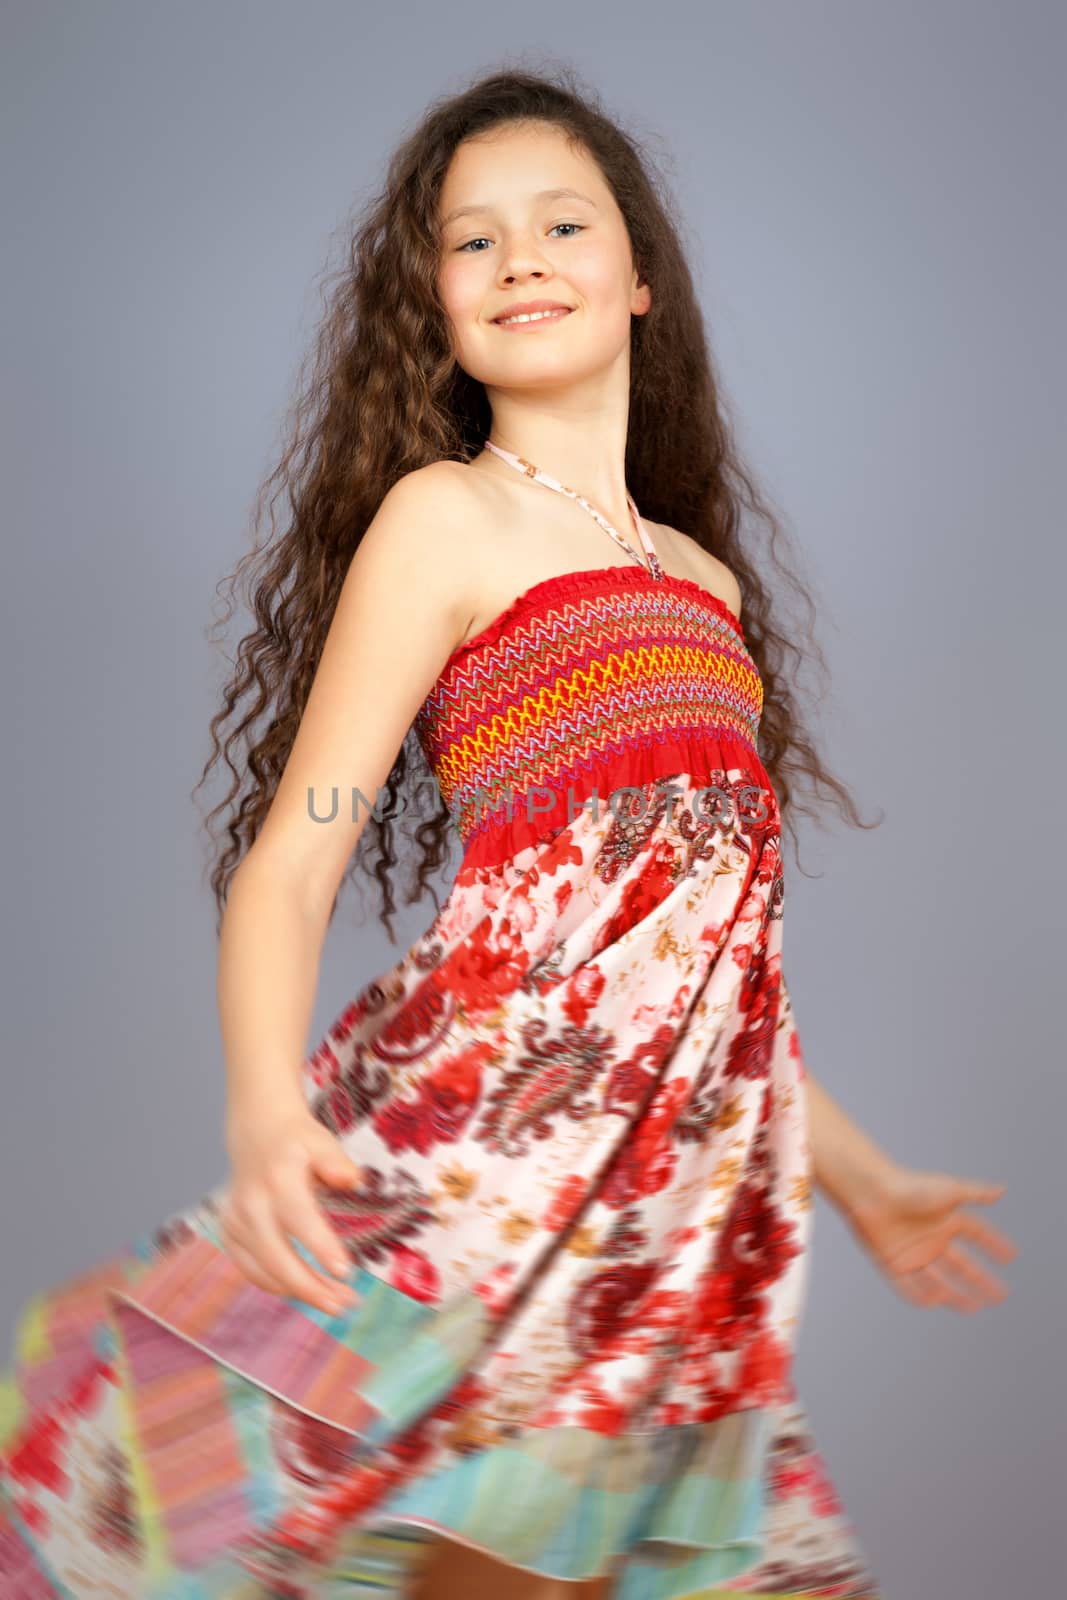 An image of a young girl dancing